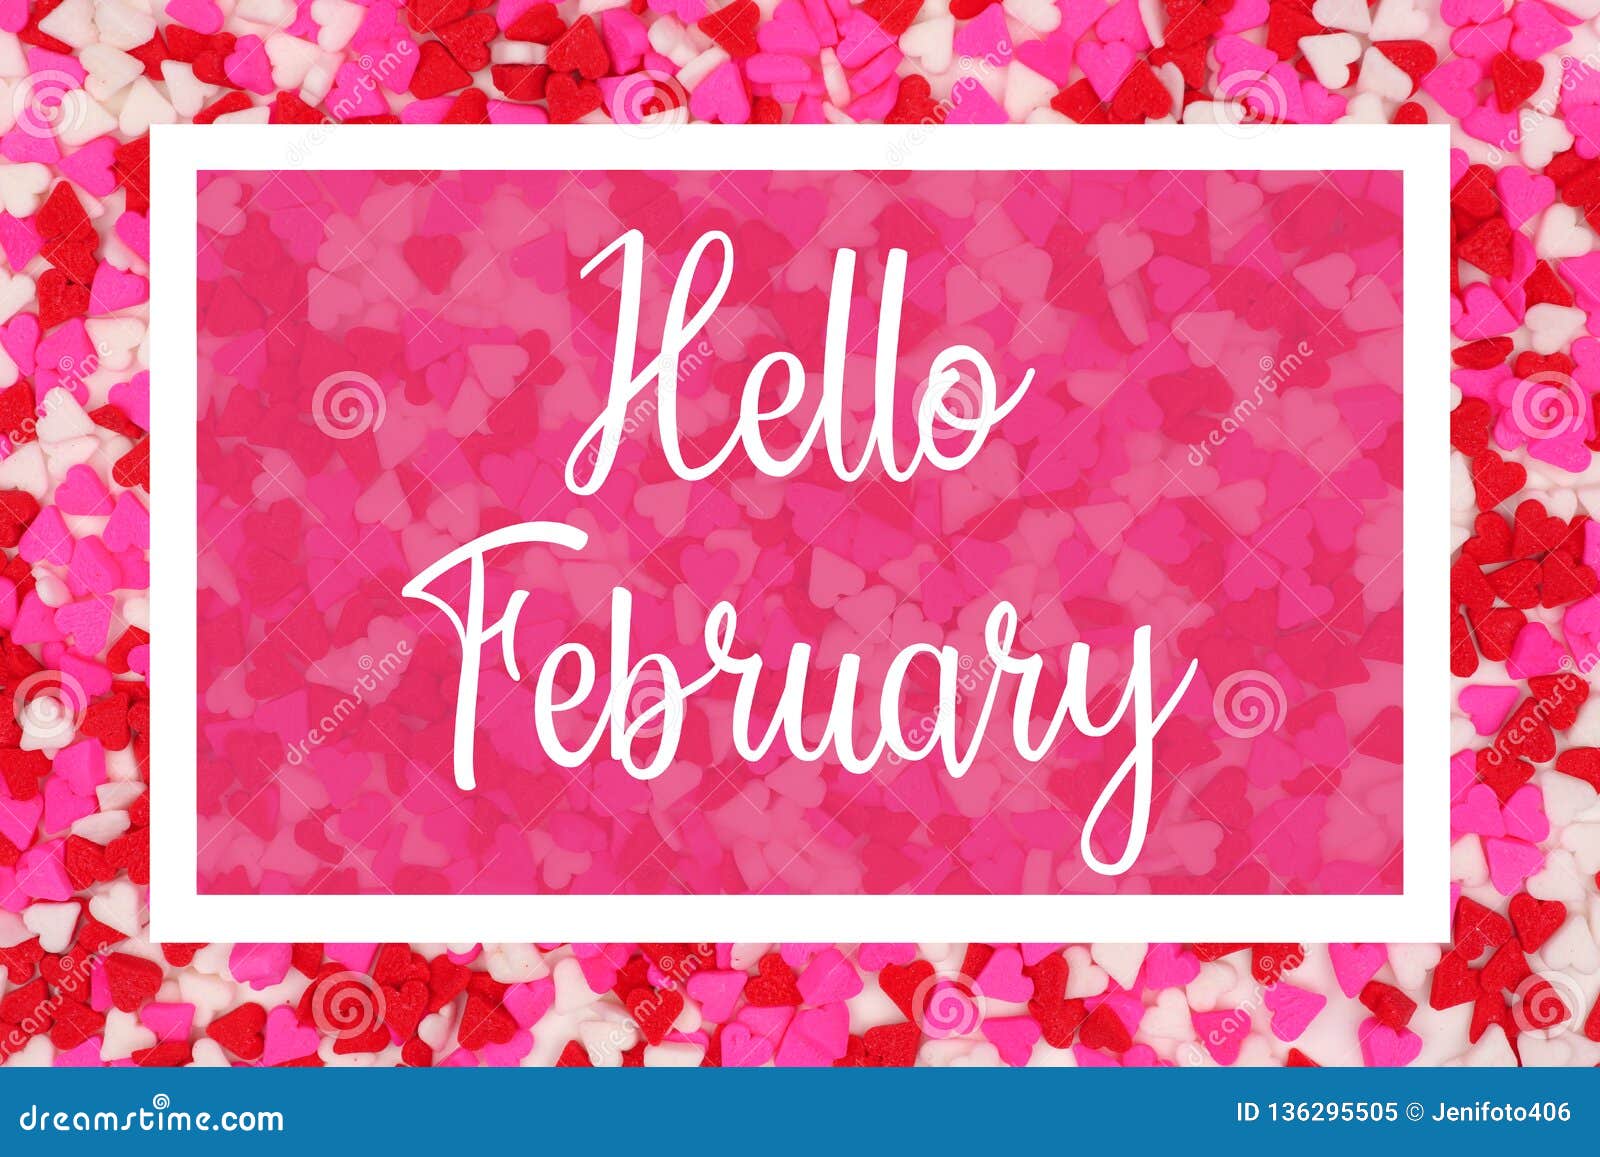 hello february greeting card with white text over a candy heart background